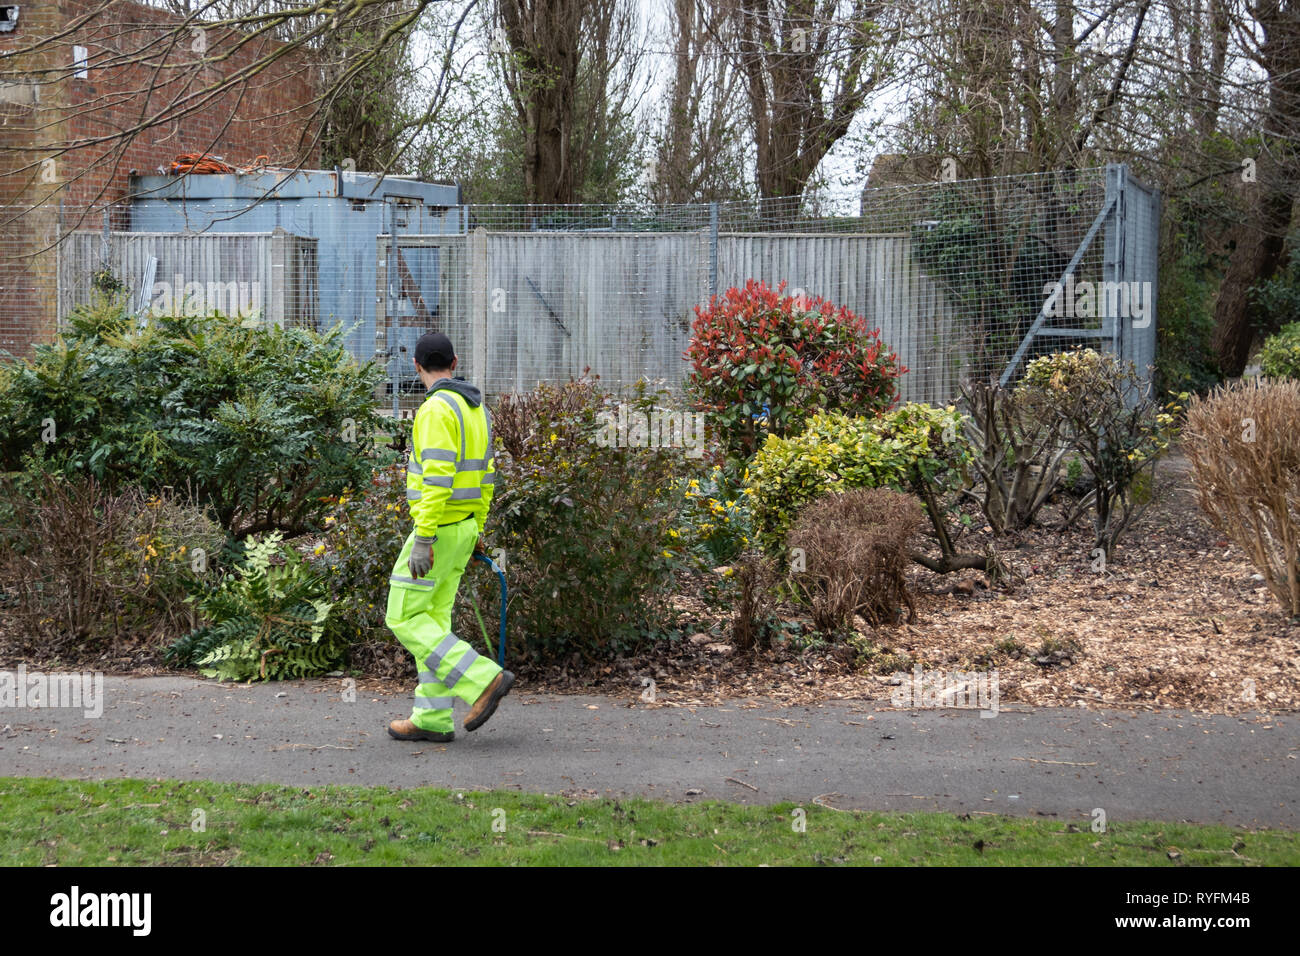 Council gardener wearing Hi-Vis clothing at work in the park Stock Photo